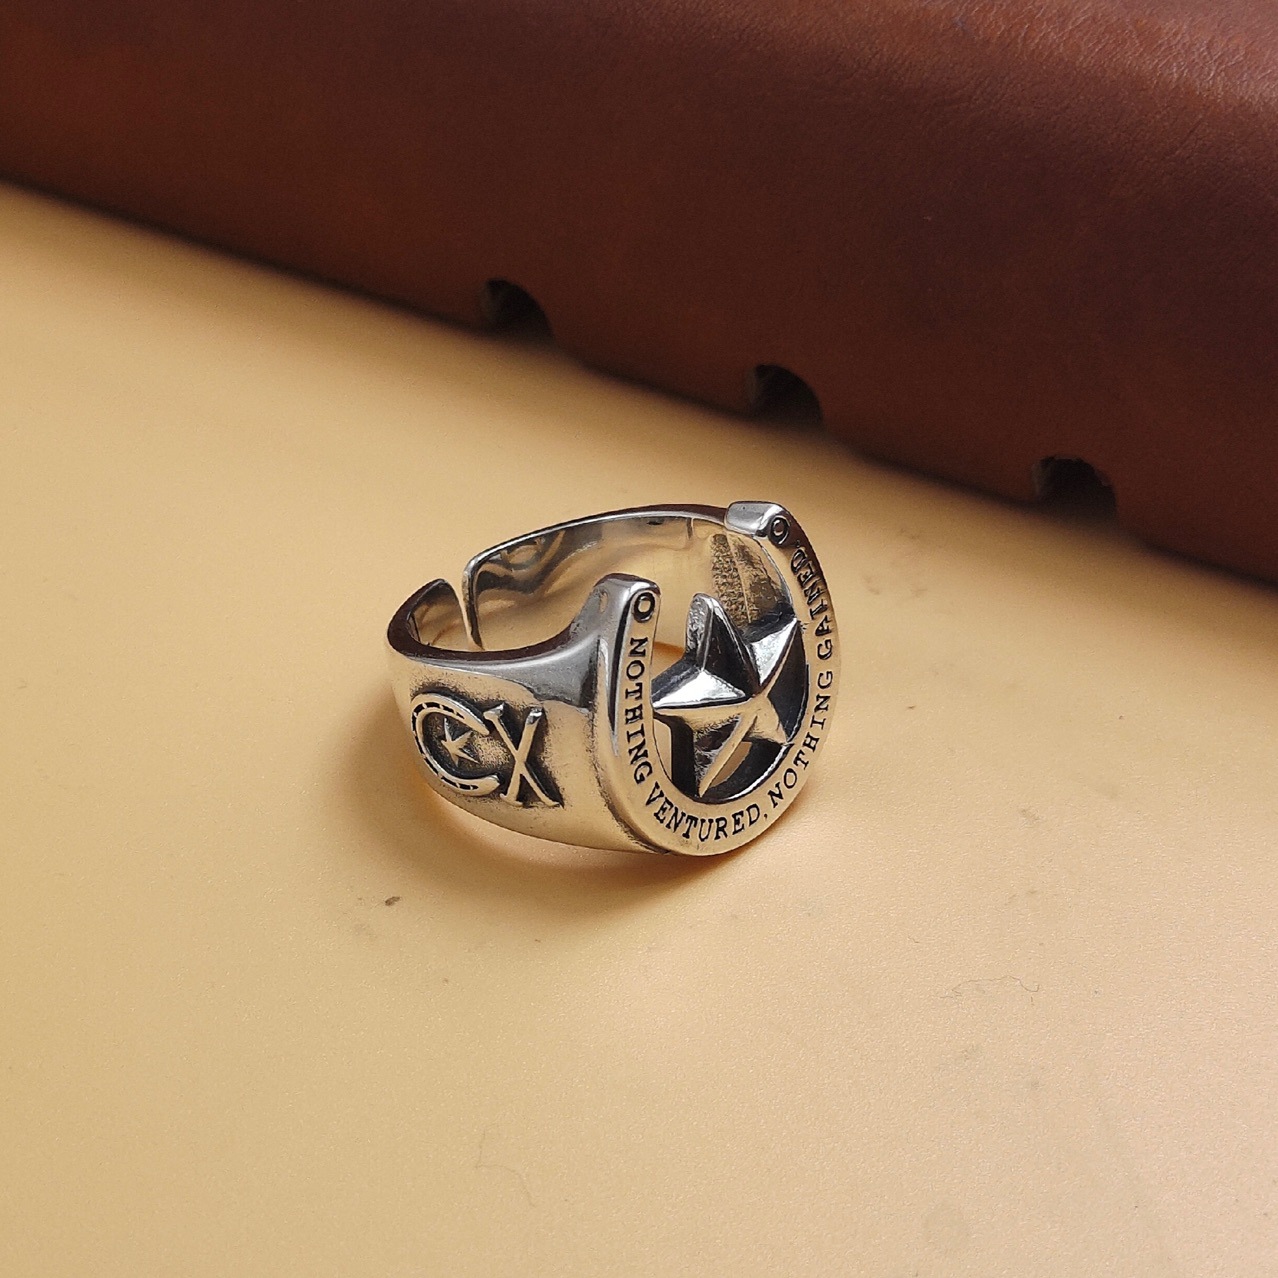 The Elegant Men's Silver Star Ring - Perfect for Any Occasion